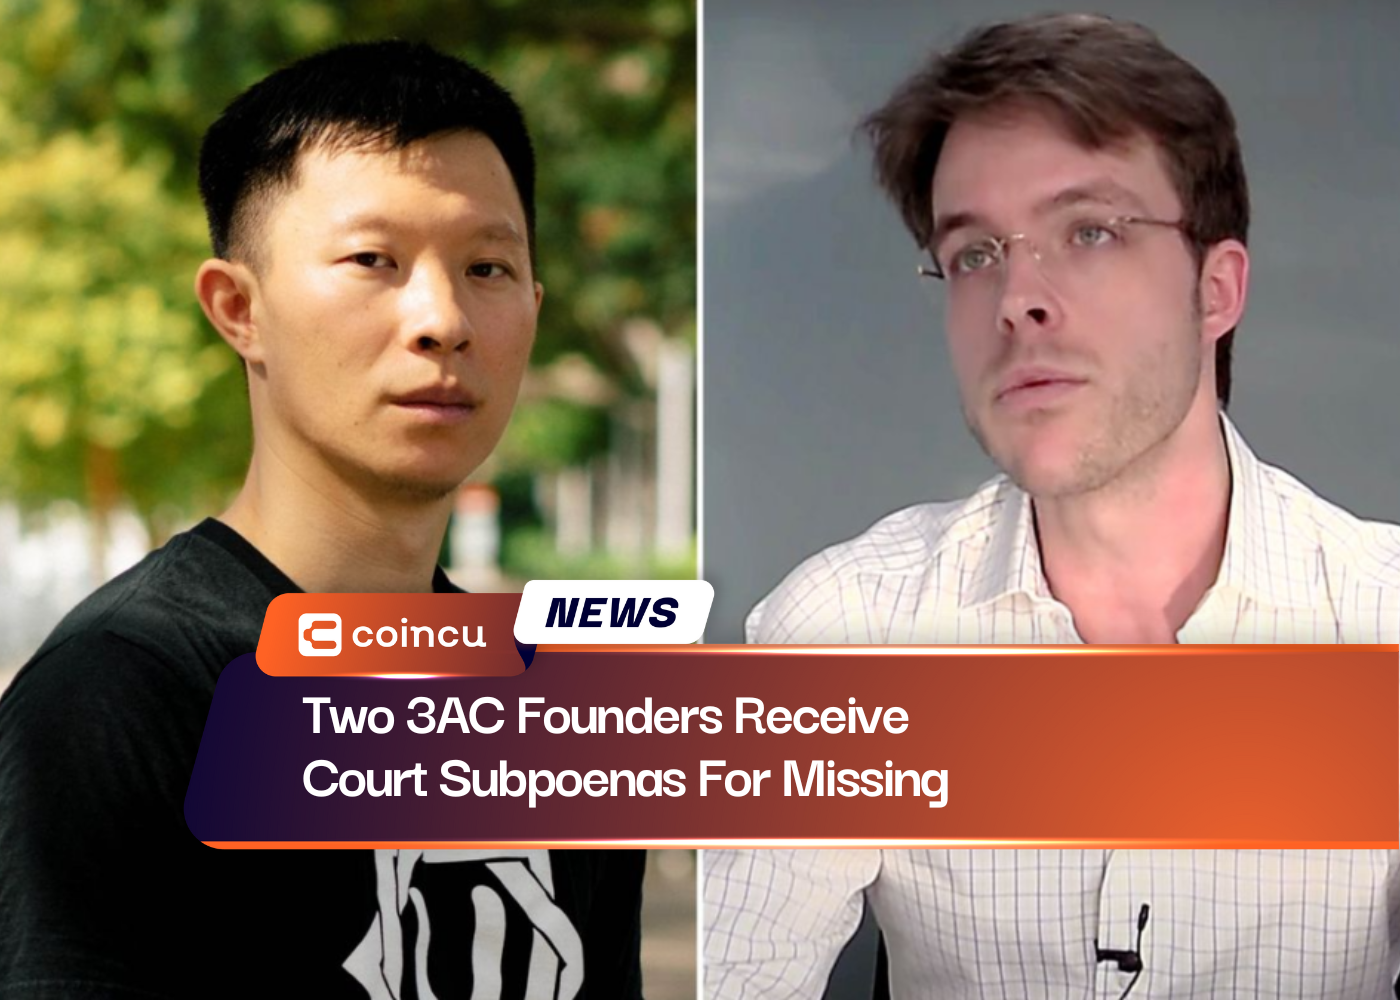 Two 3AC Founders Receive Court Subpoenas For Missing